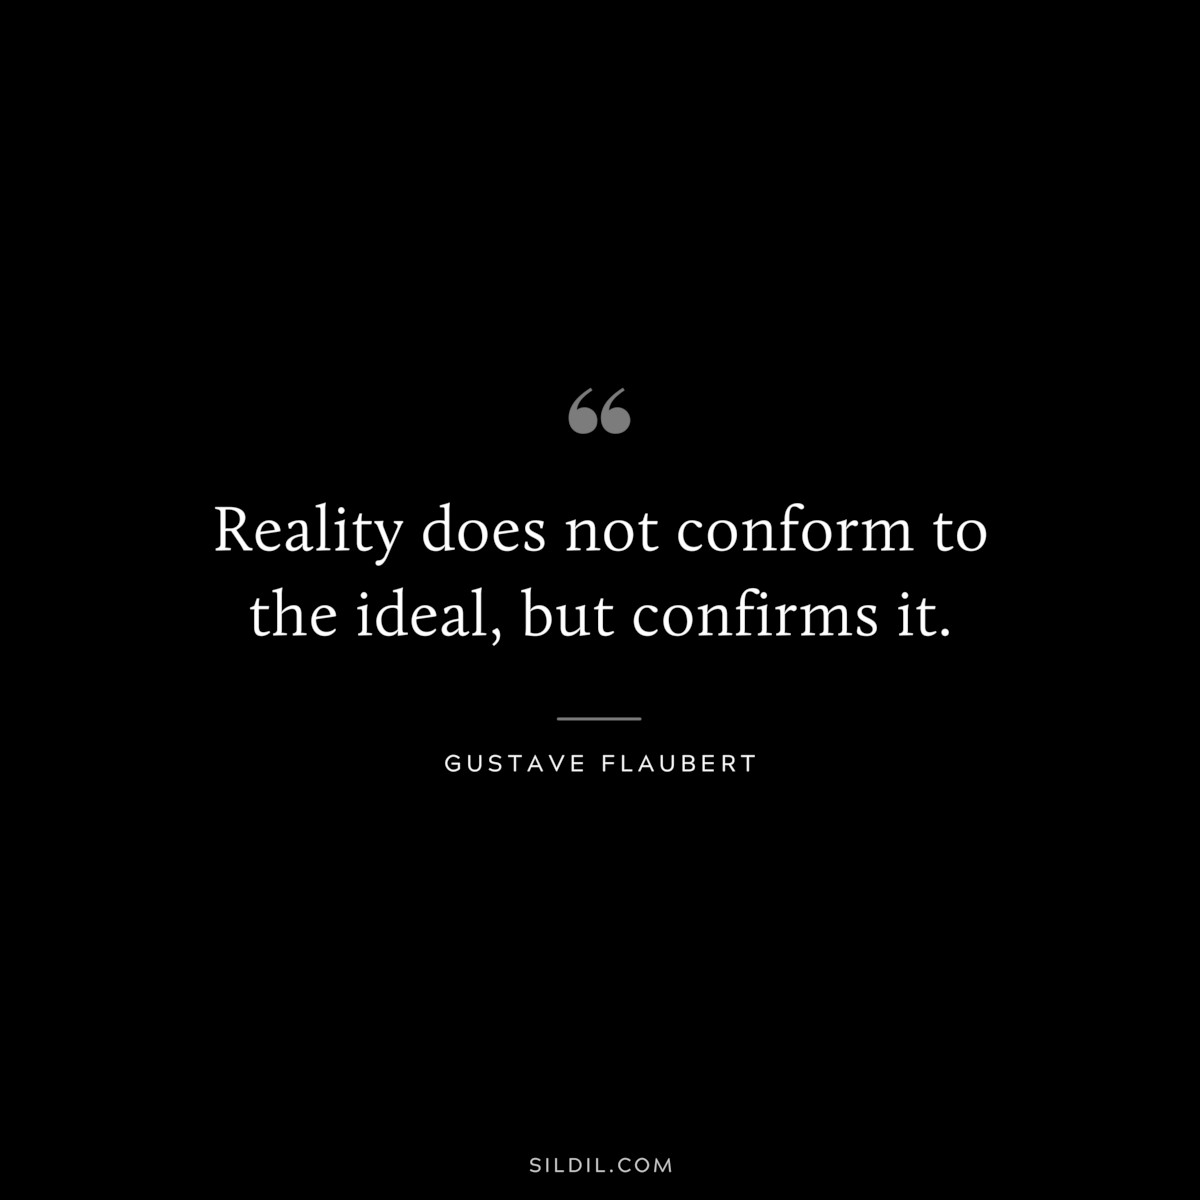 Reality does not conform to the ideal, but confirms it. ― Gustave Flaubert